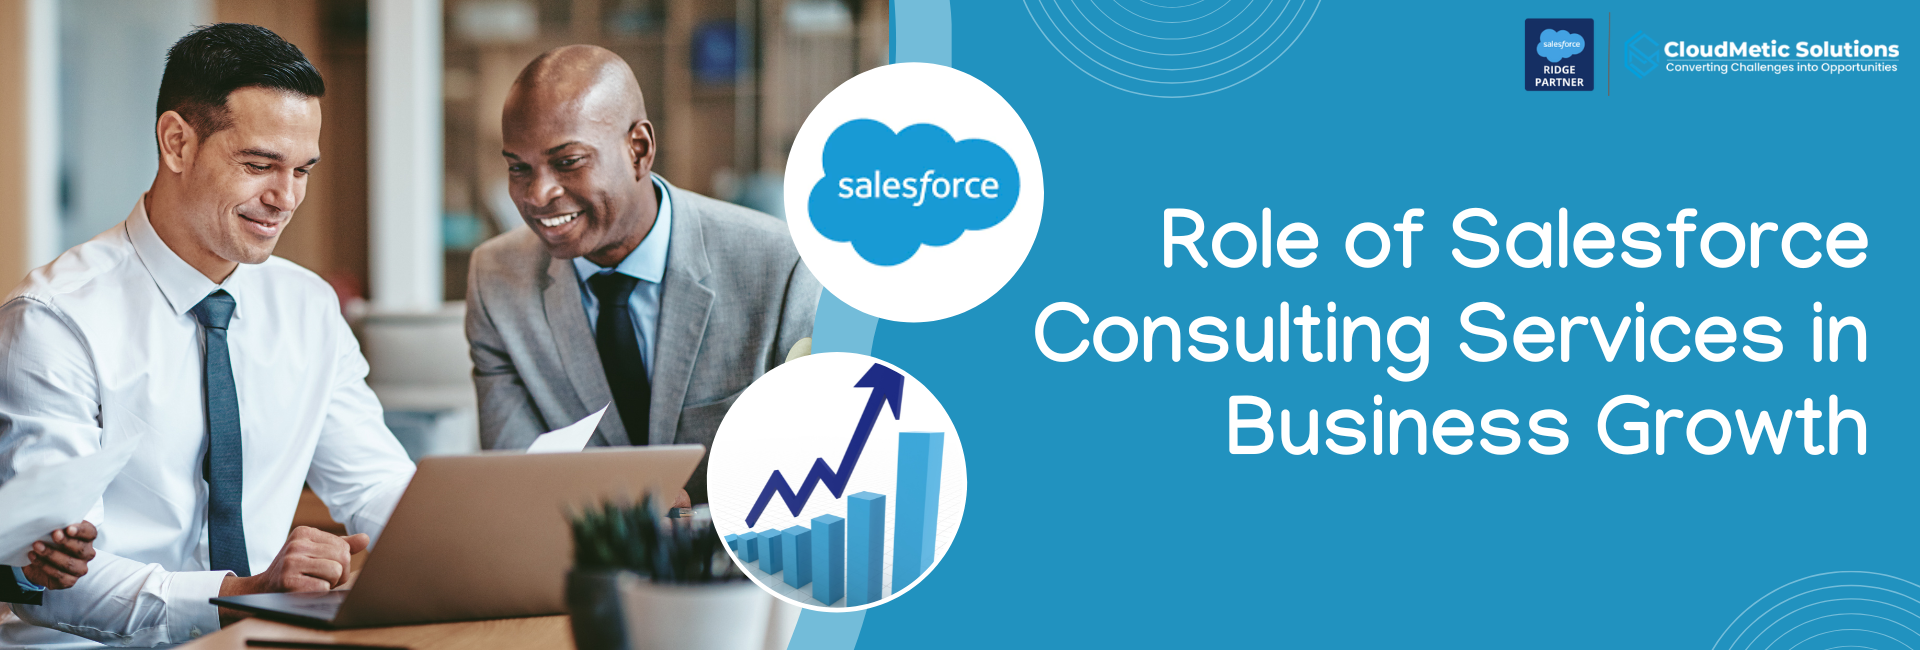 The Role of Salesforce Consulting Services in Business Growth